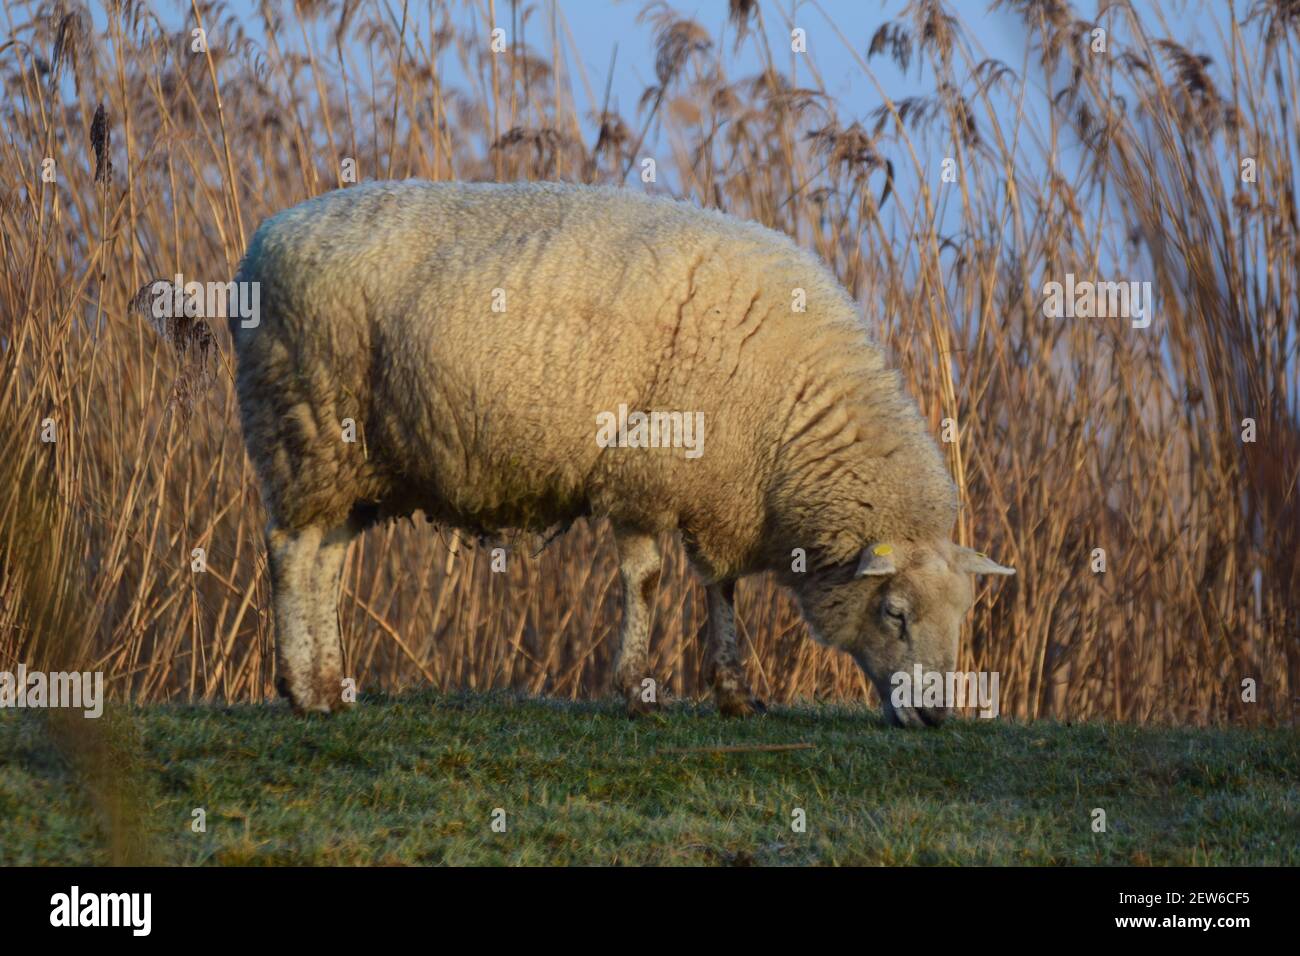 White sheep grazing on a dike with reeds in the background Stock Photo